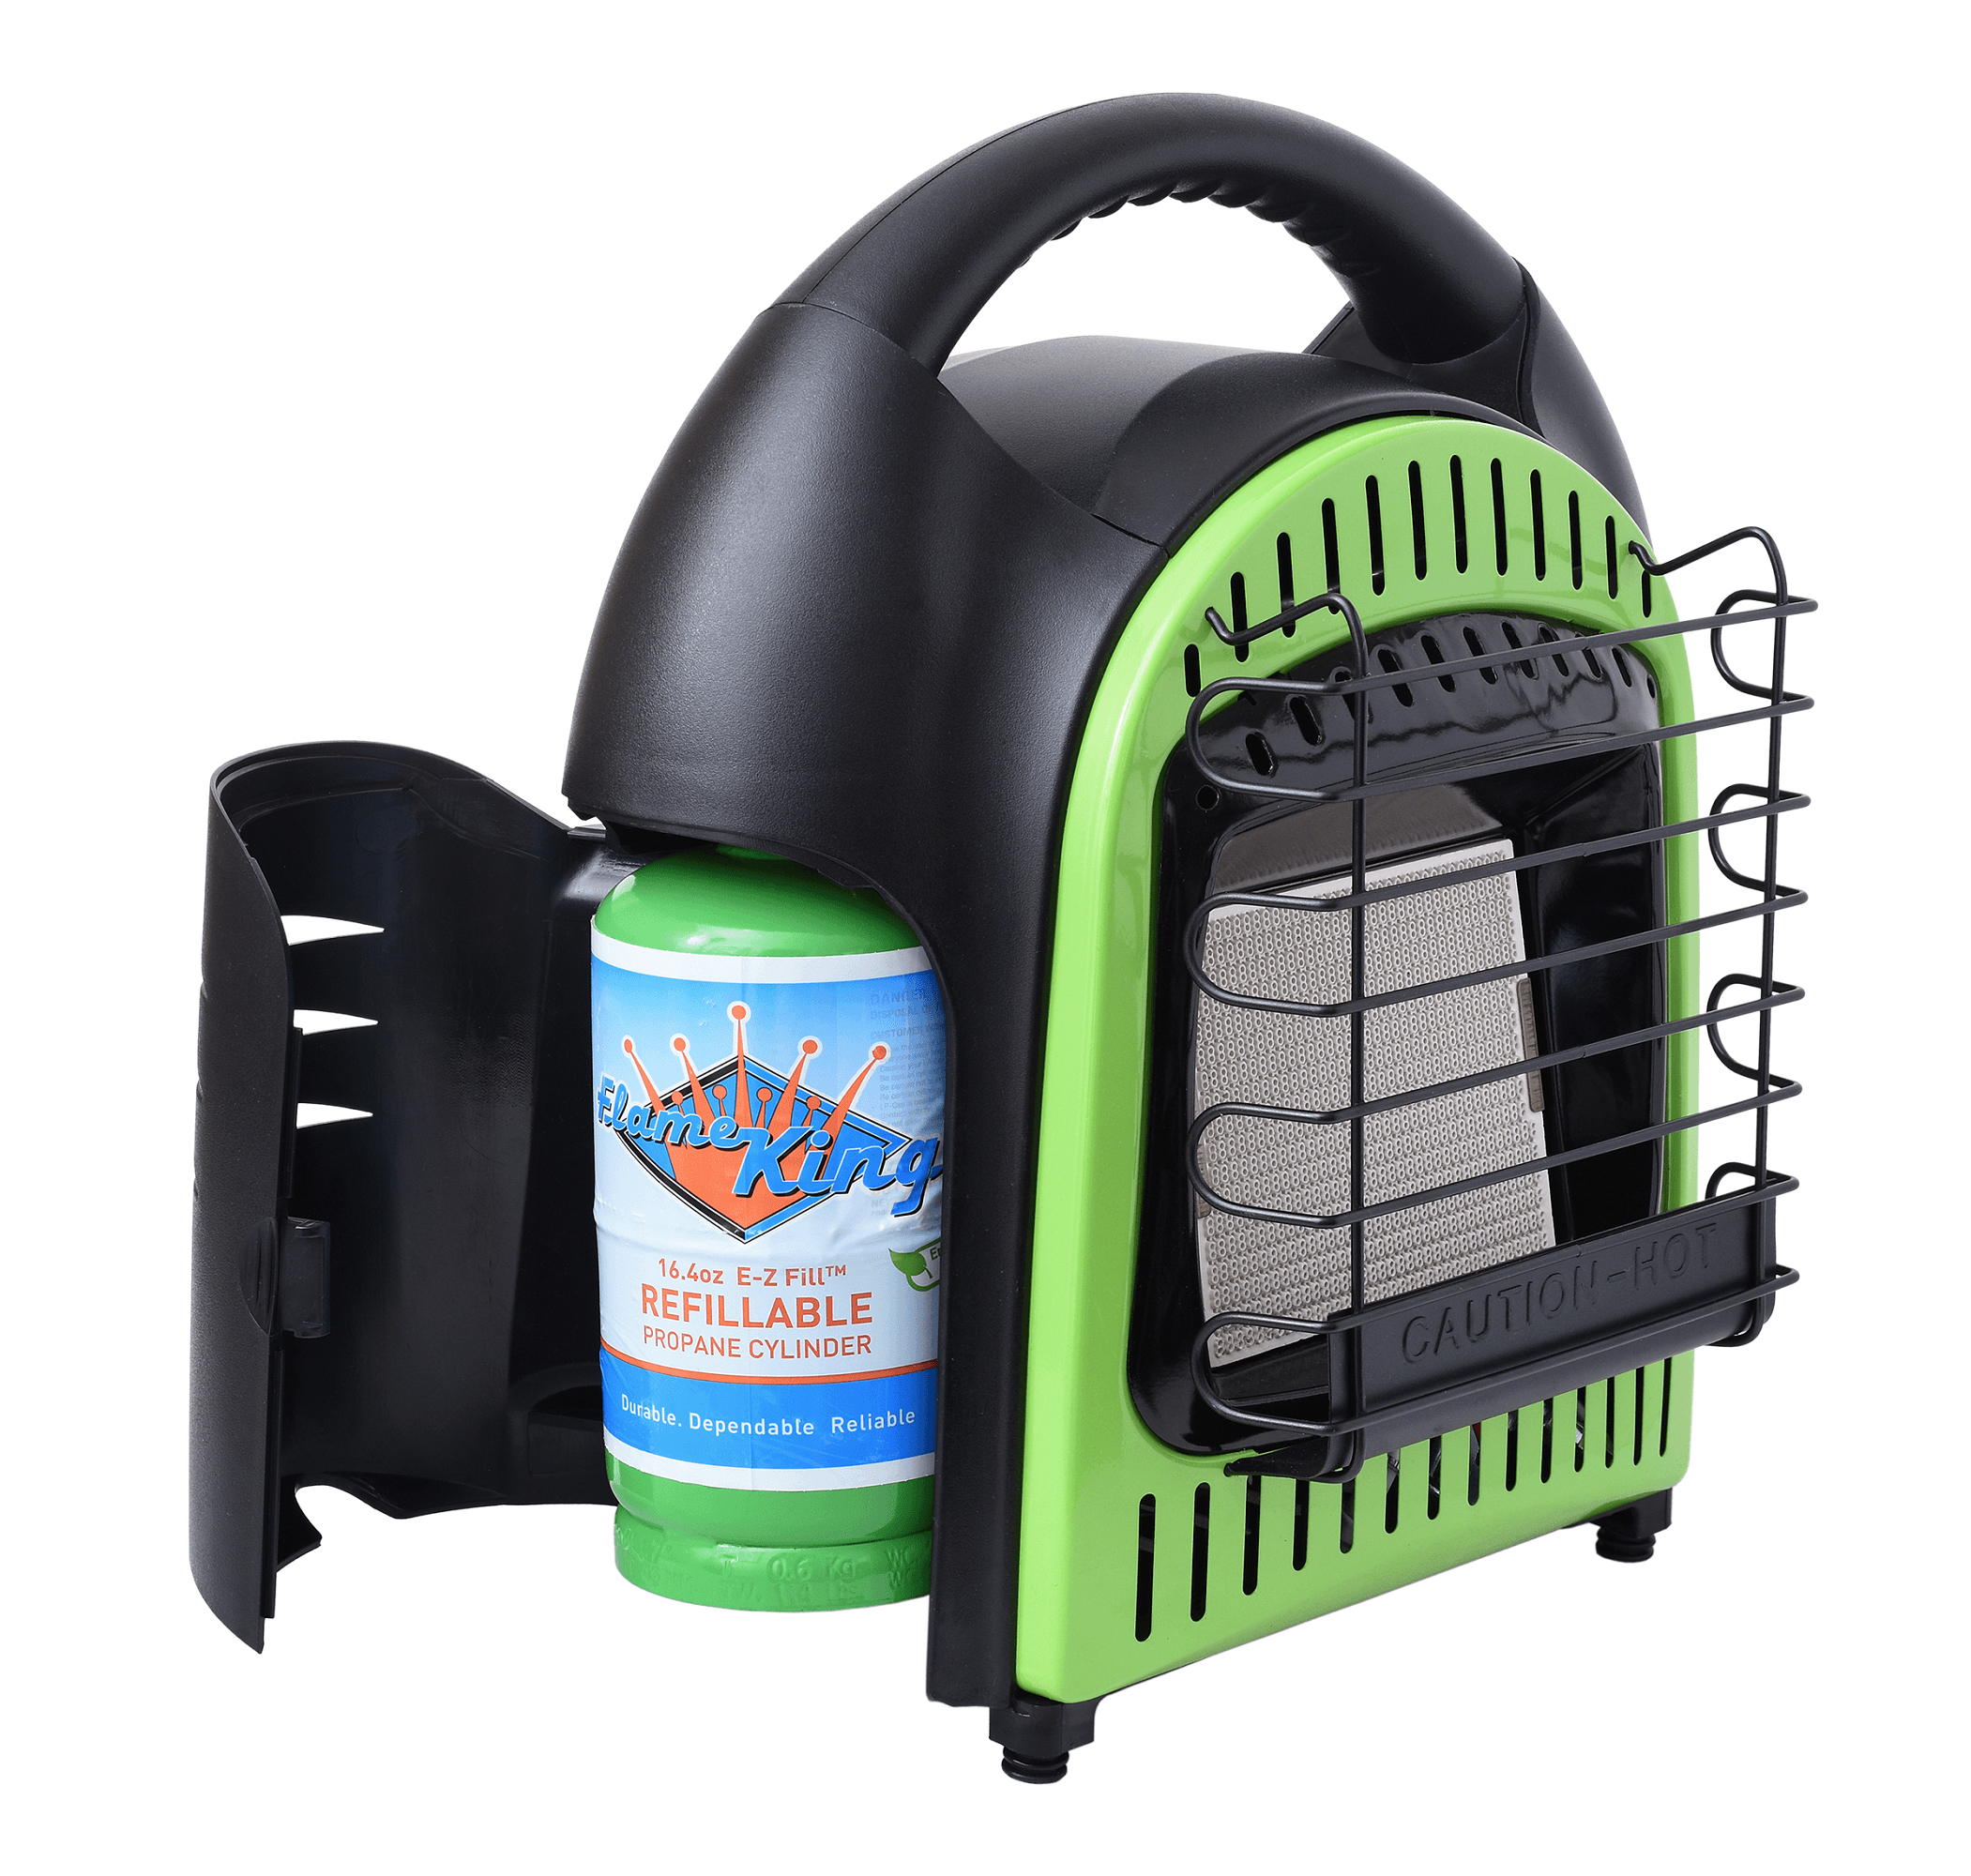 Flame King 10,000 BTU Propane Gas Tank Space Radiant Portable Heater Indoor & Outdoor - Flame King